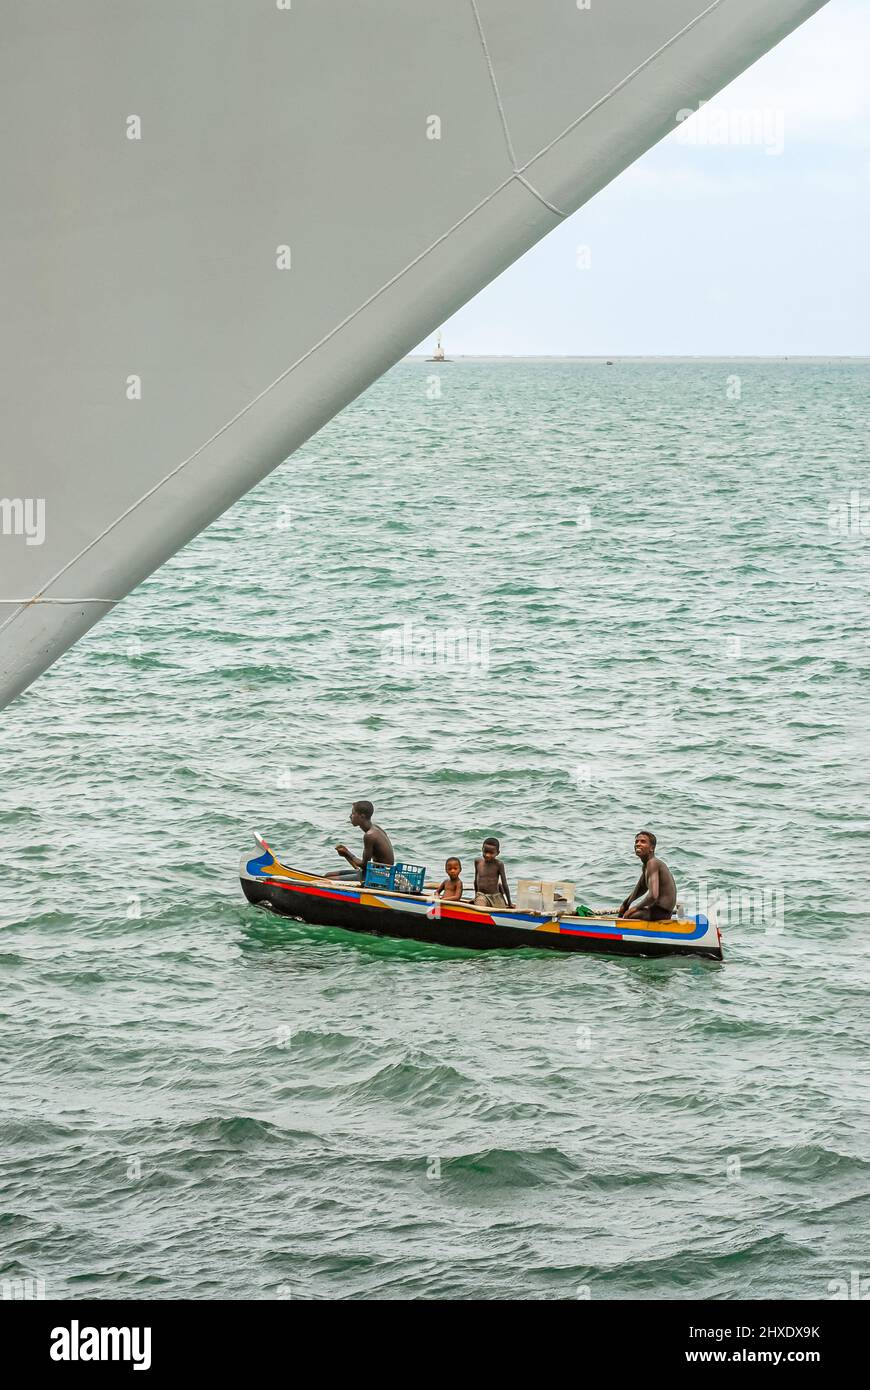 Madagascar fishermen in their dugout canoe in fascination at the bow of a cruise ship, Toliara, Madagascar Island Stock Photo